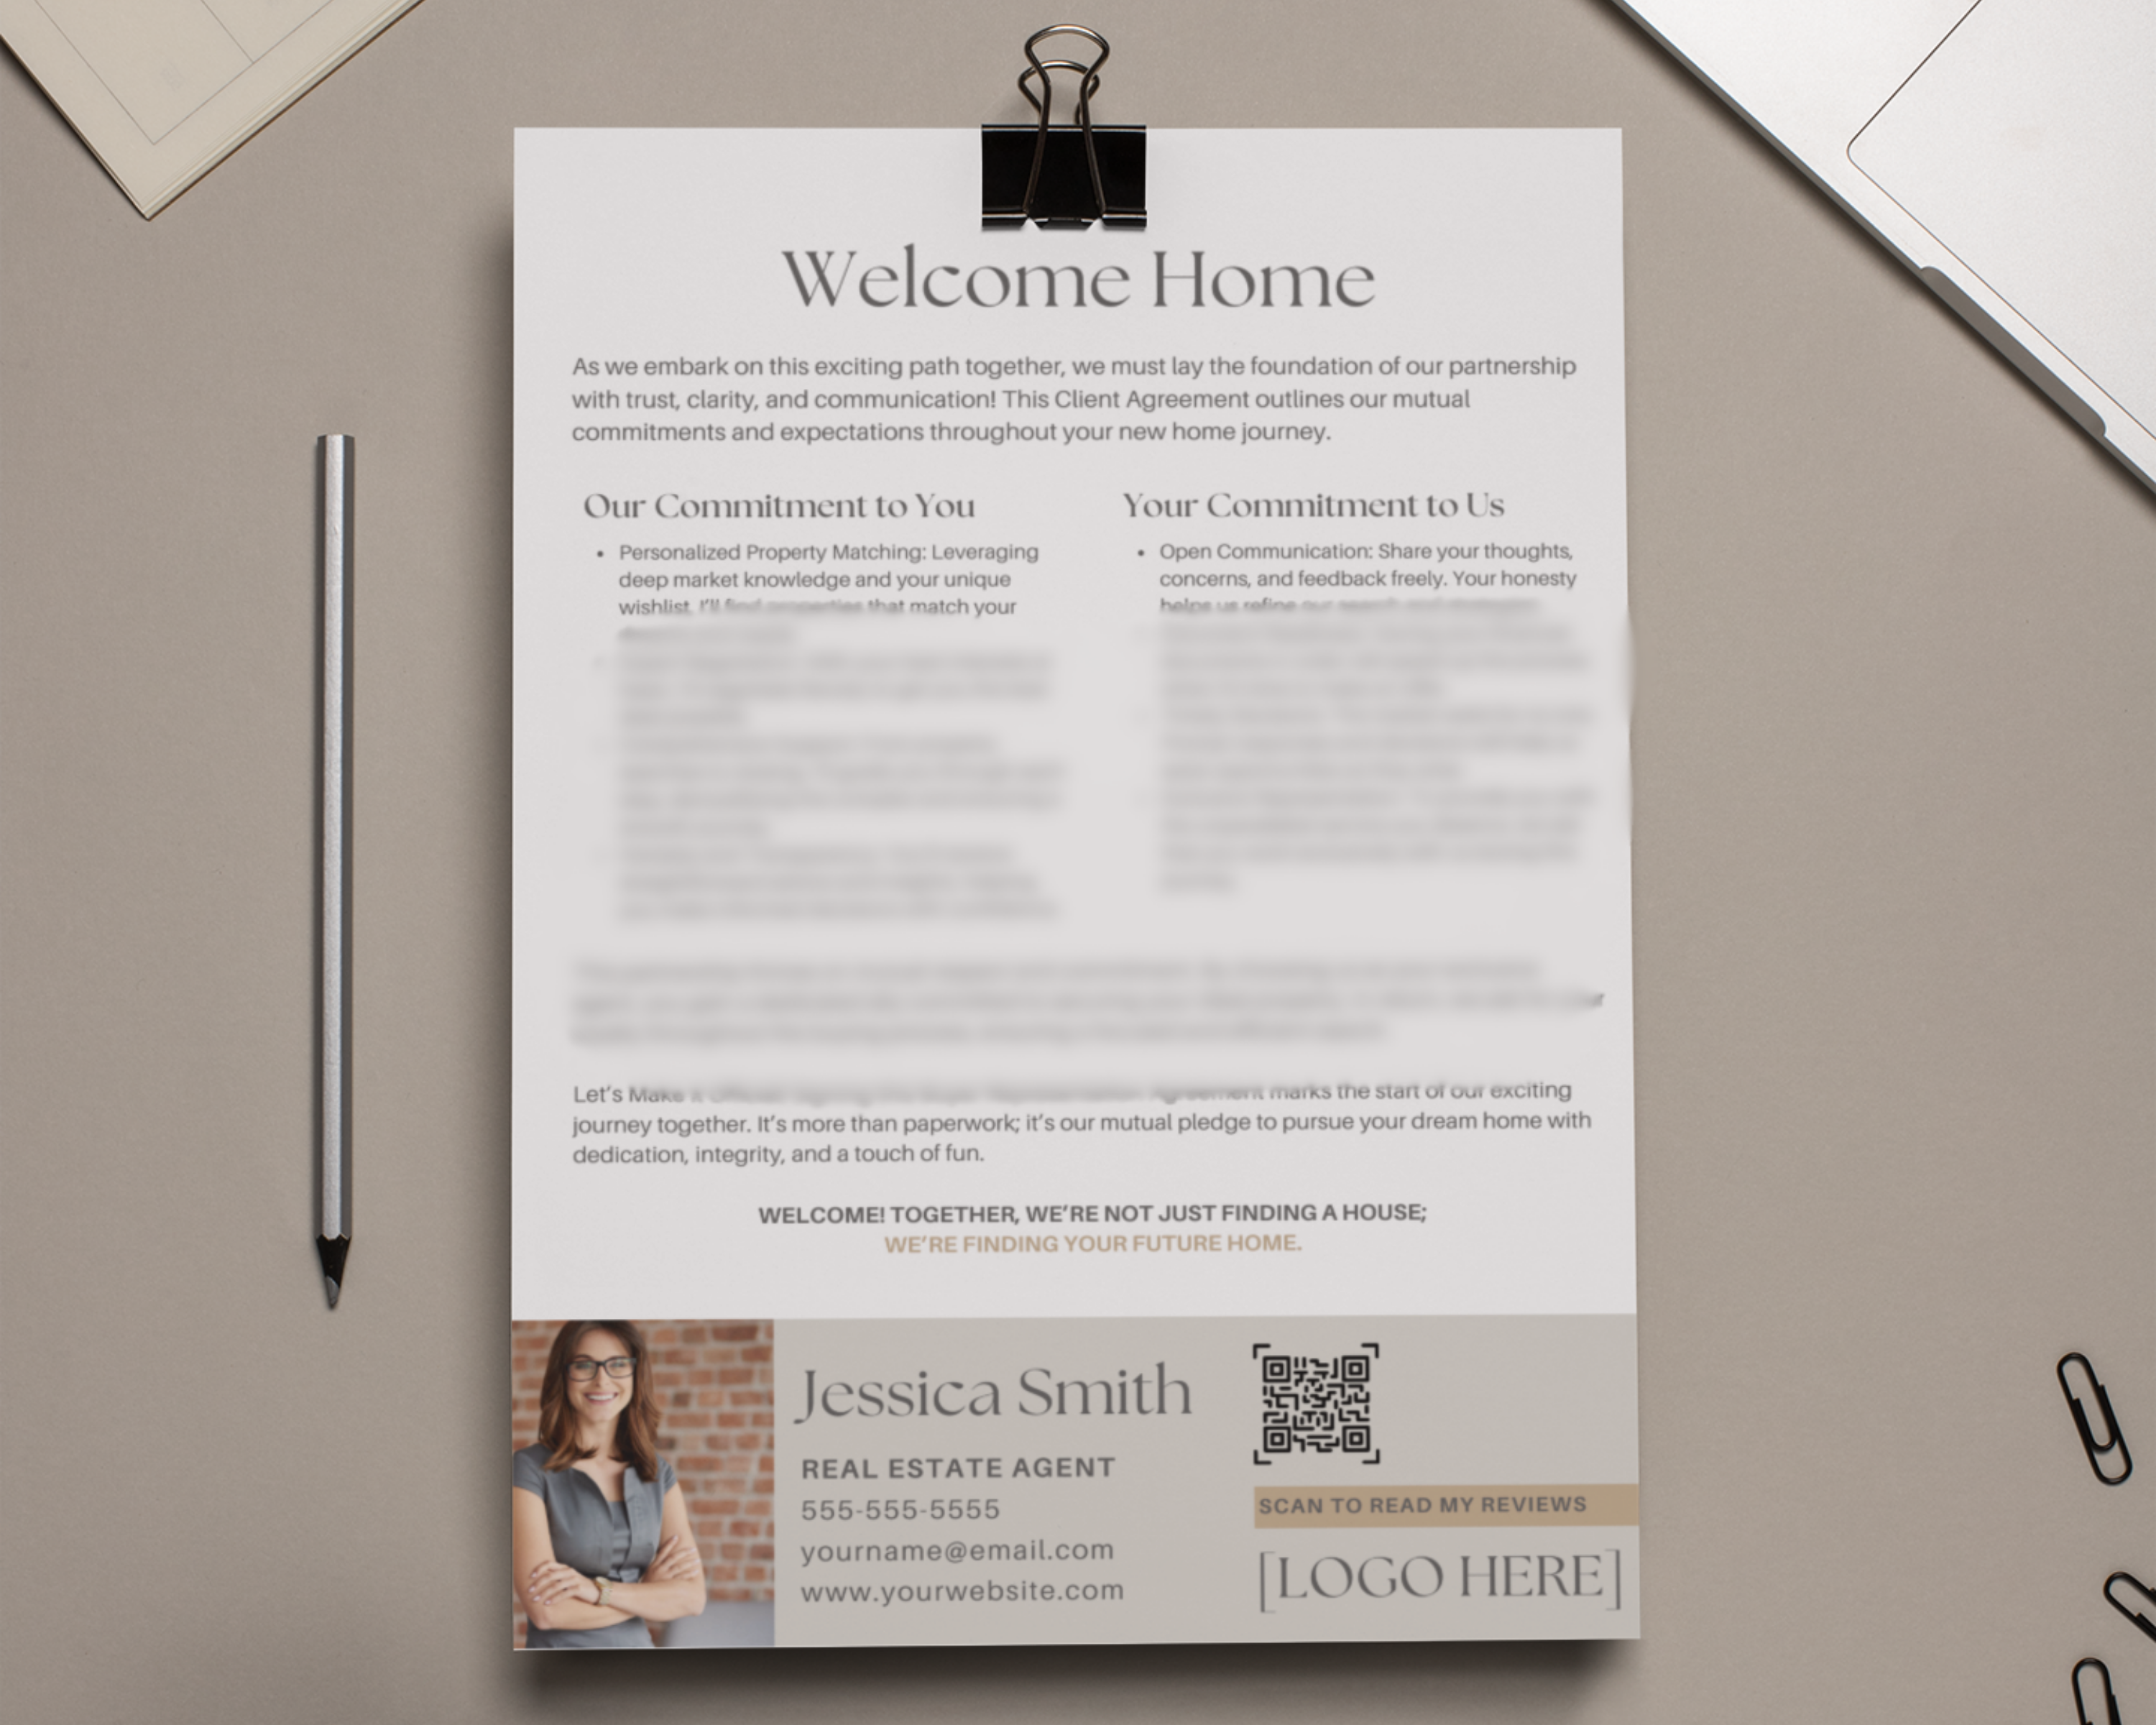 contract template, real estate flyer, moving checklist, buyer questionnaire, realtor marketing real estate postcard buyers guide, Buyer presentation, Real estate letter, Home Buyer Letter, Buyer Agreement, Agency Agreemen